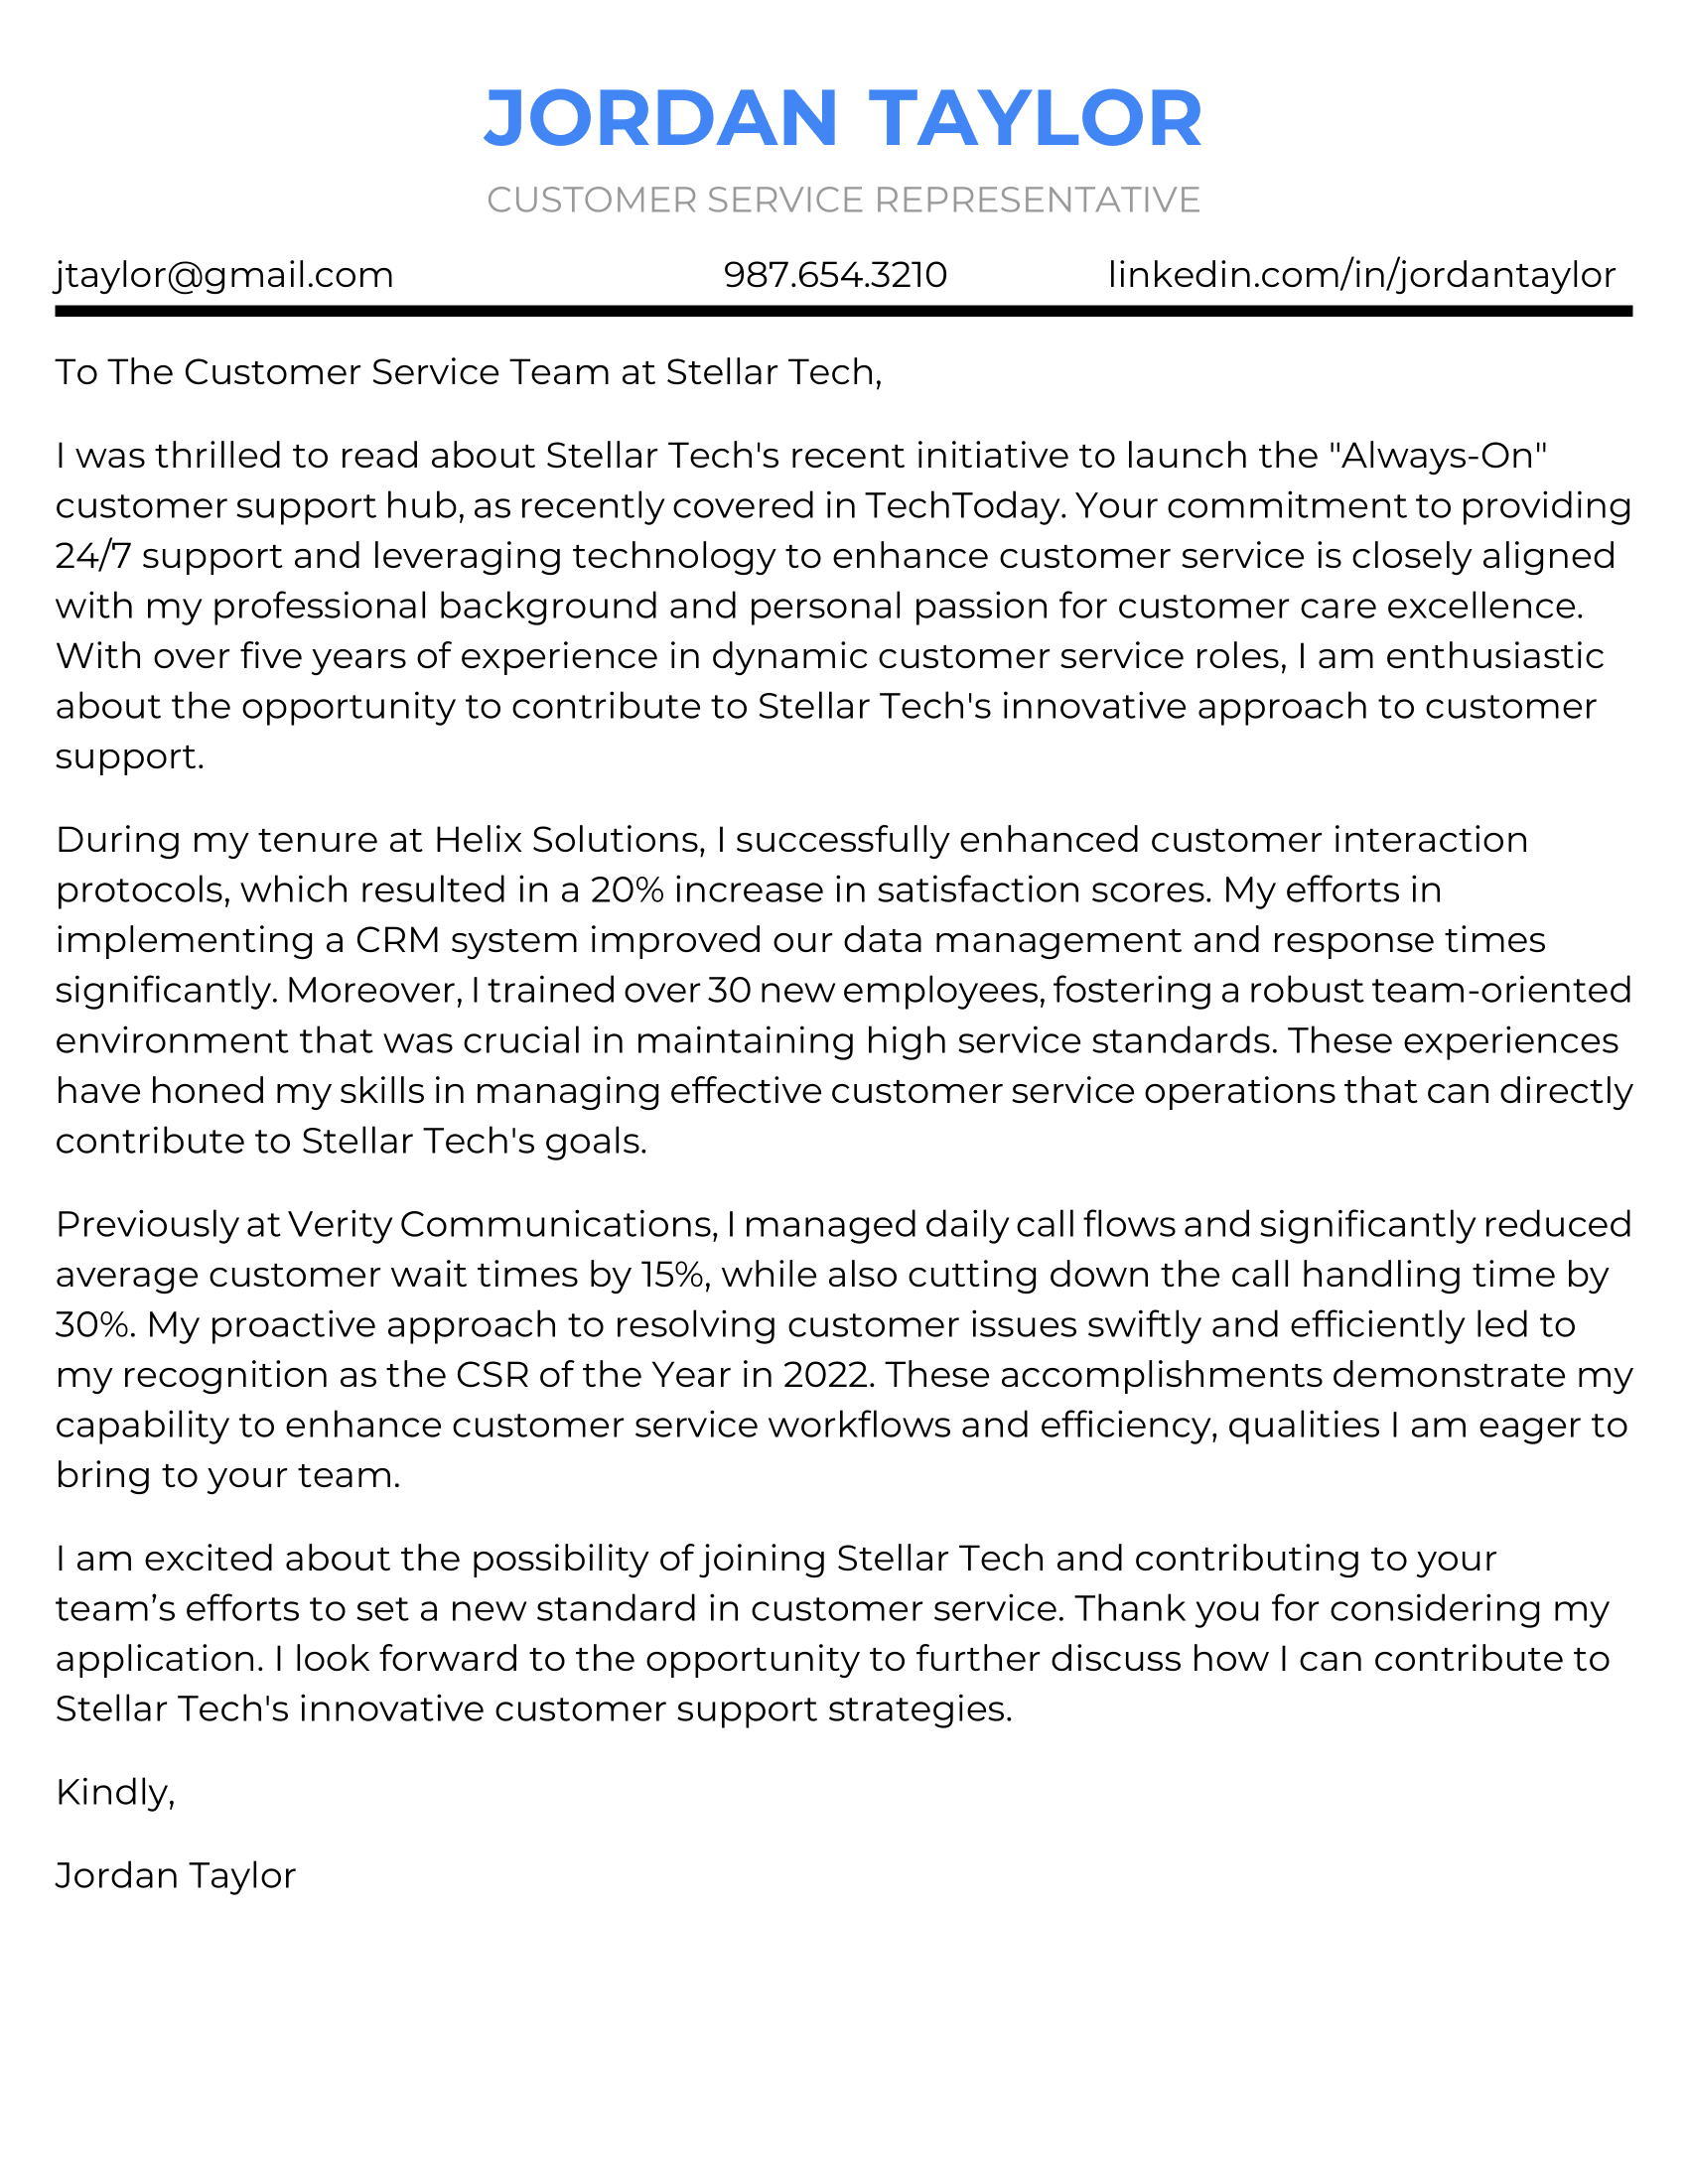 Customer Service Representative Cover Letter Example #1 - Traditional Background